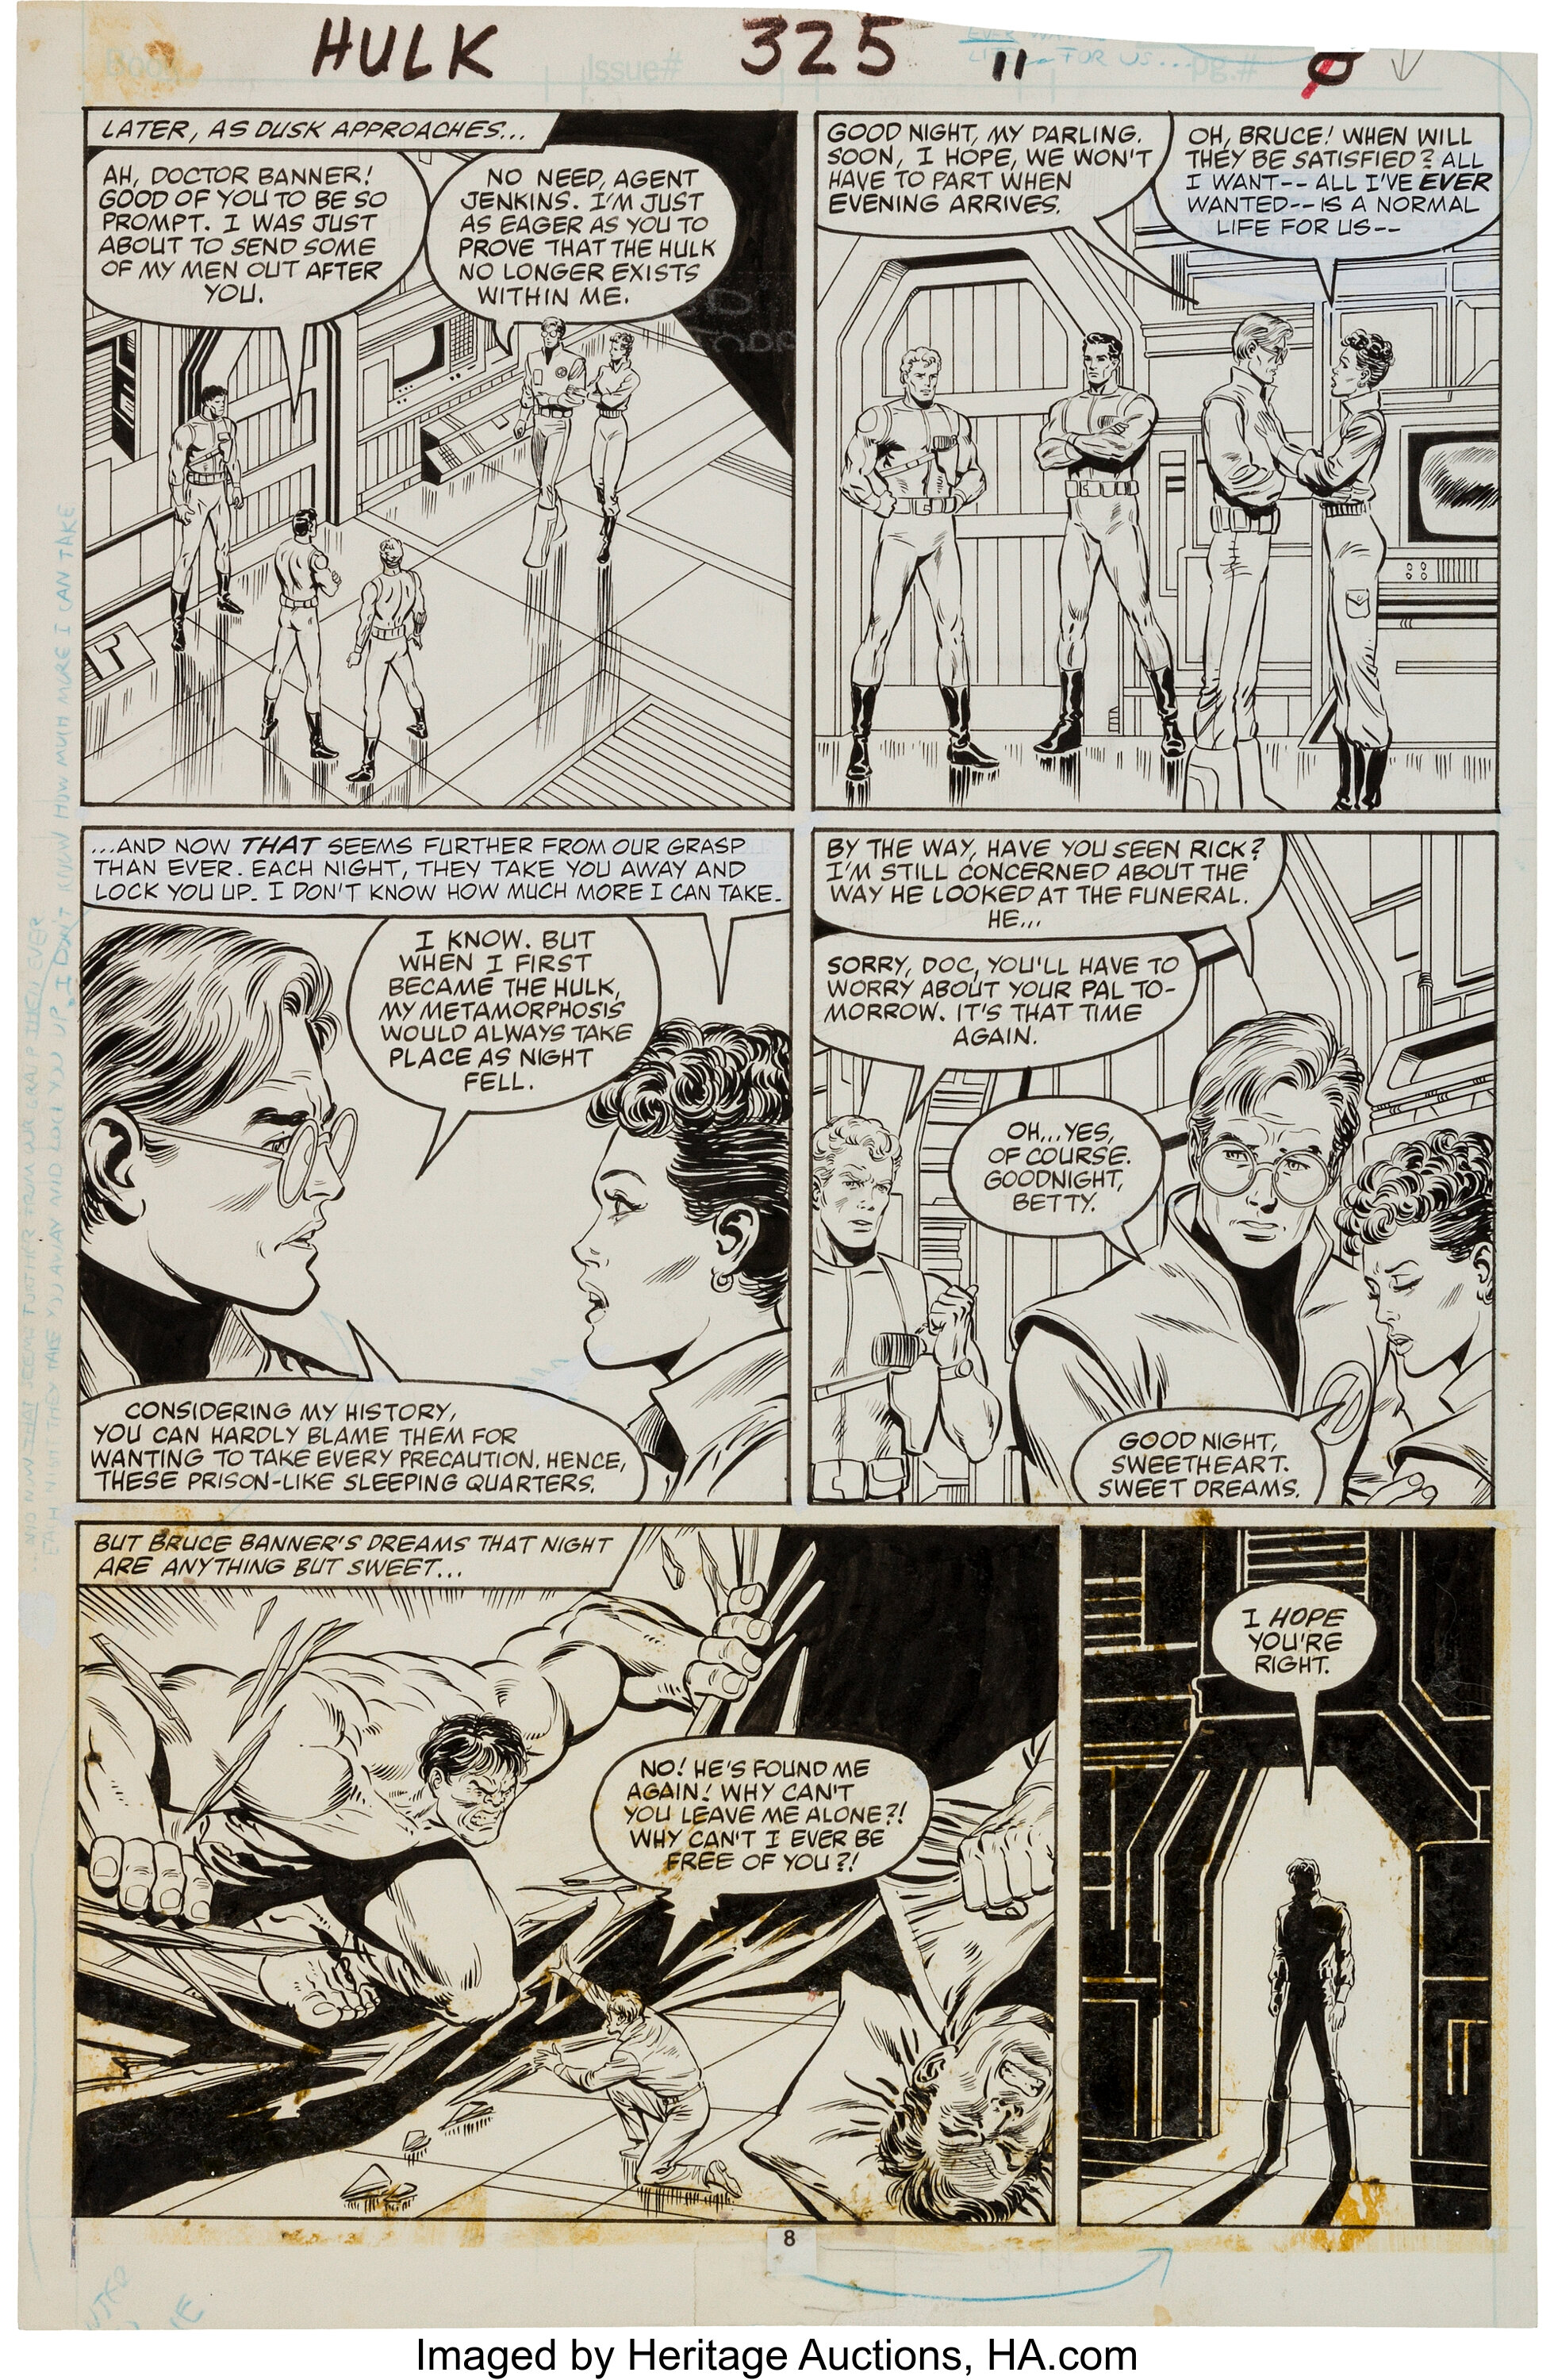 Steve Geiger And Bob Mcleod Incredible Hulk 325 Page 8 Original Lot Heritage Auctions